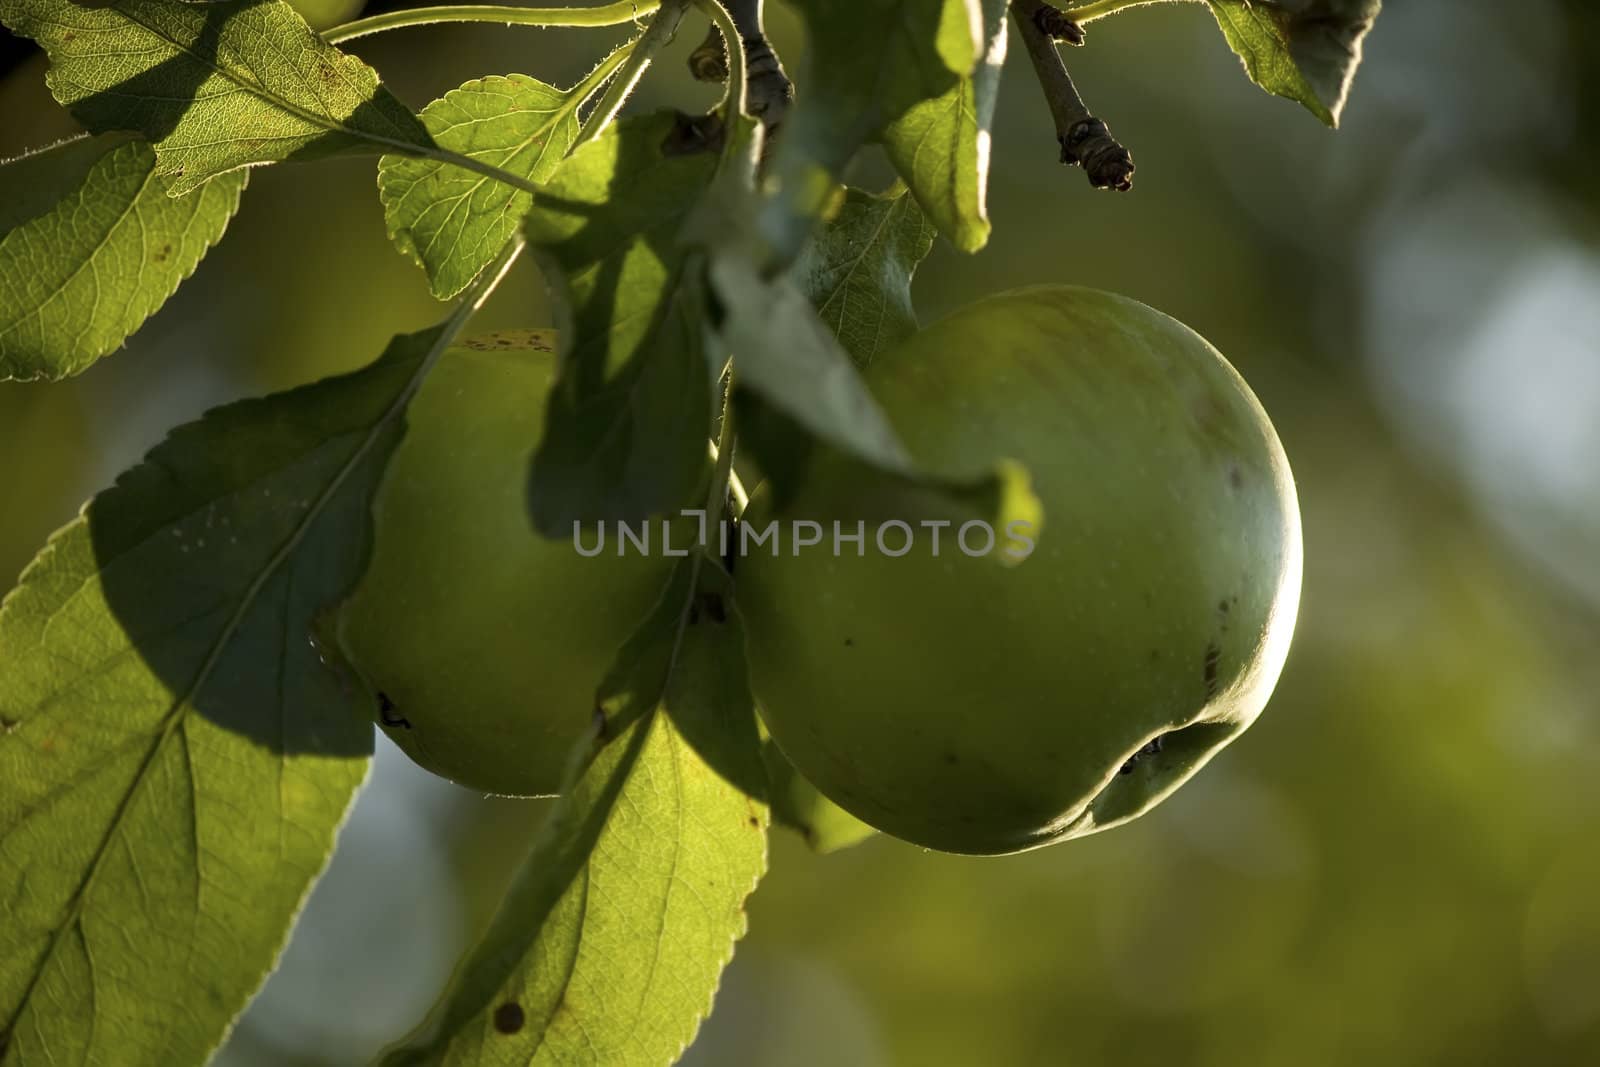 apples on a branch by nubephoto